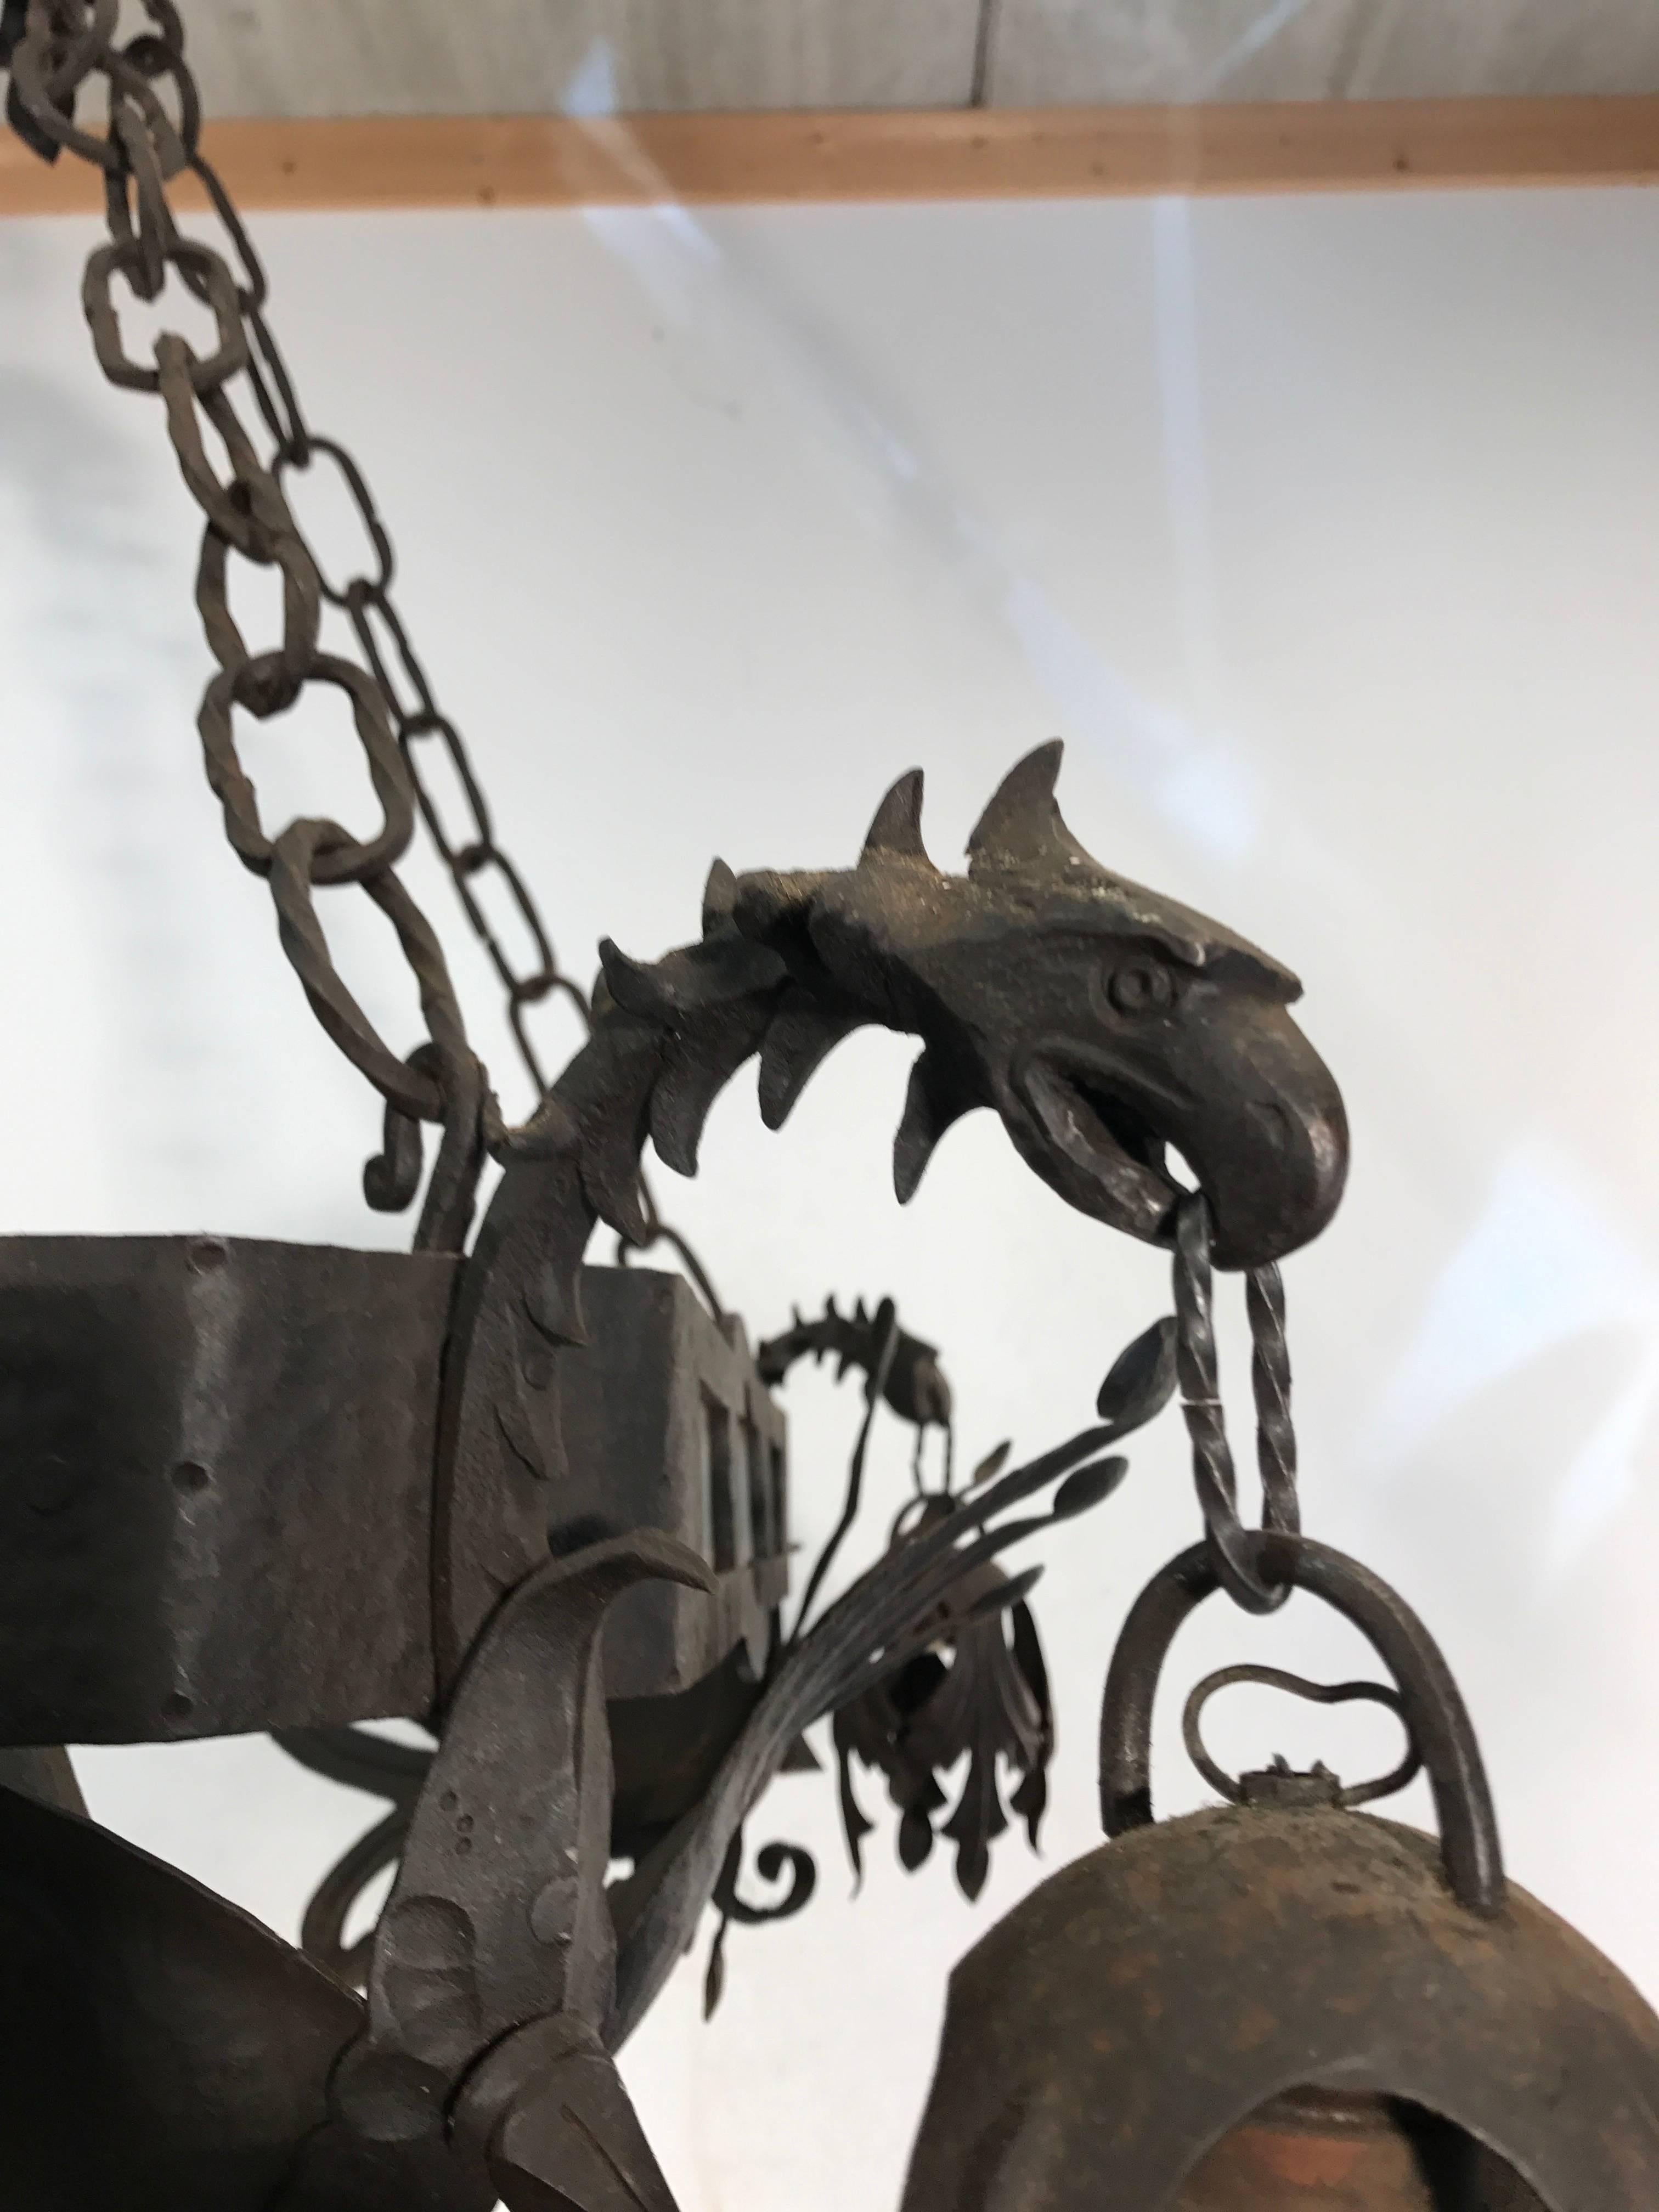 Antique Italian handcrafted work of lighting art.

This amazing handcrafted five-light chandelier from Tuscany, Italy comes with a hand-forged griffin sculpture on each corner. The design and execution of this wrought iron pendant is simply